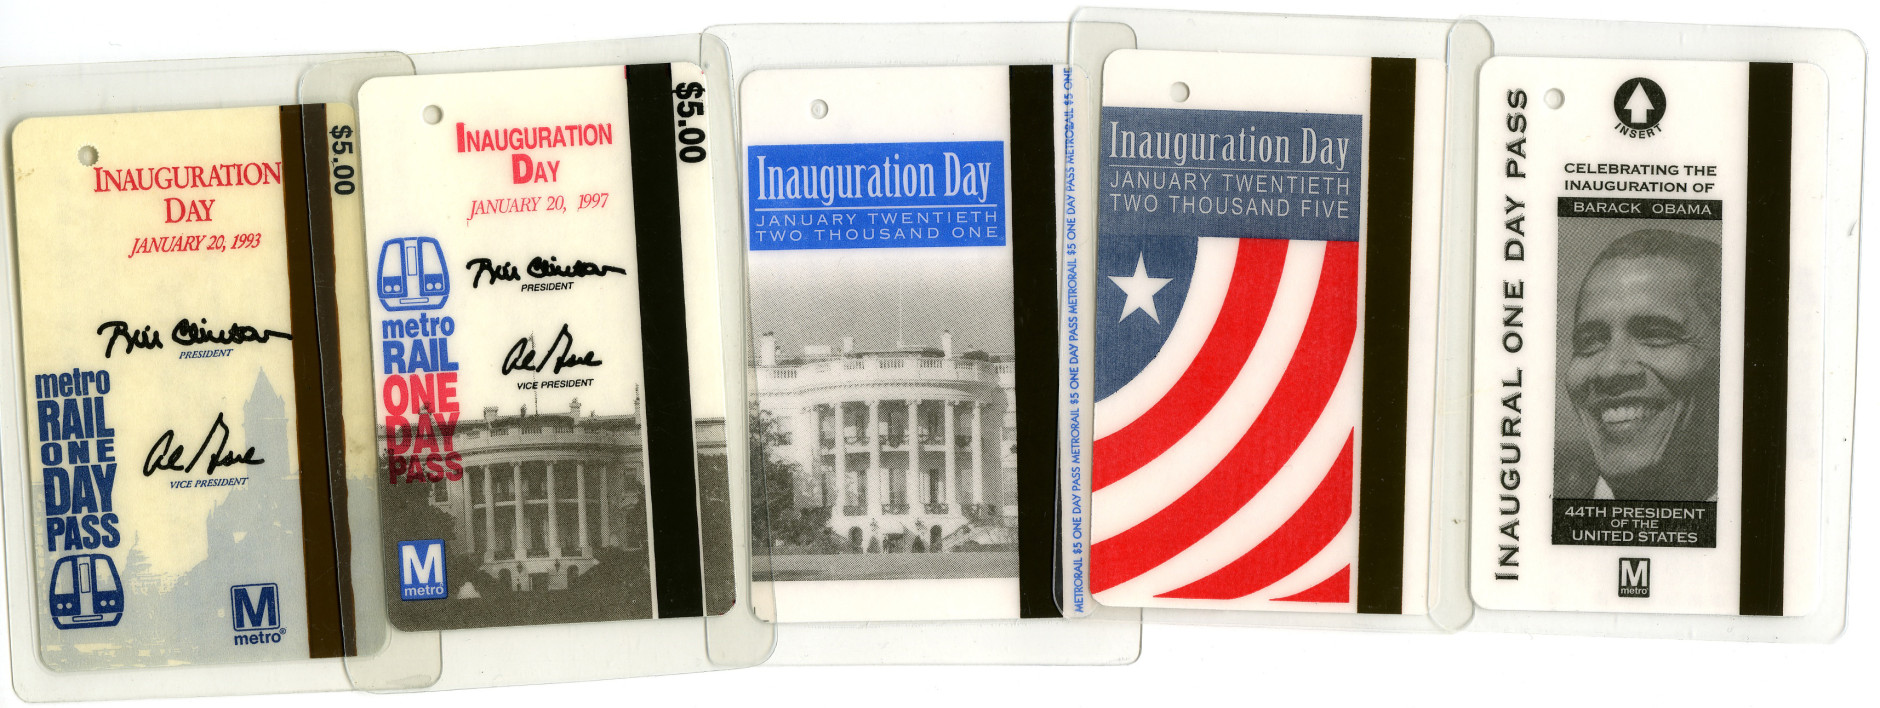 A look at the fare cards for Inauguration Day from 1993 - 2009. (Courtesy WMATA)